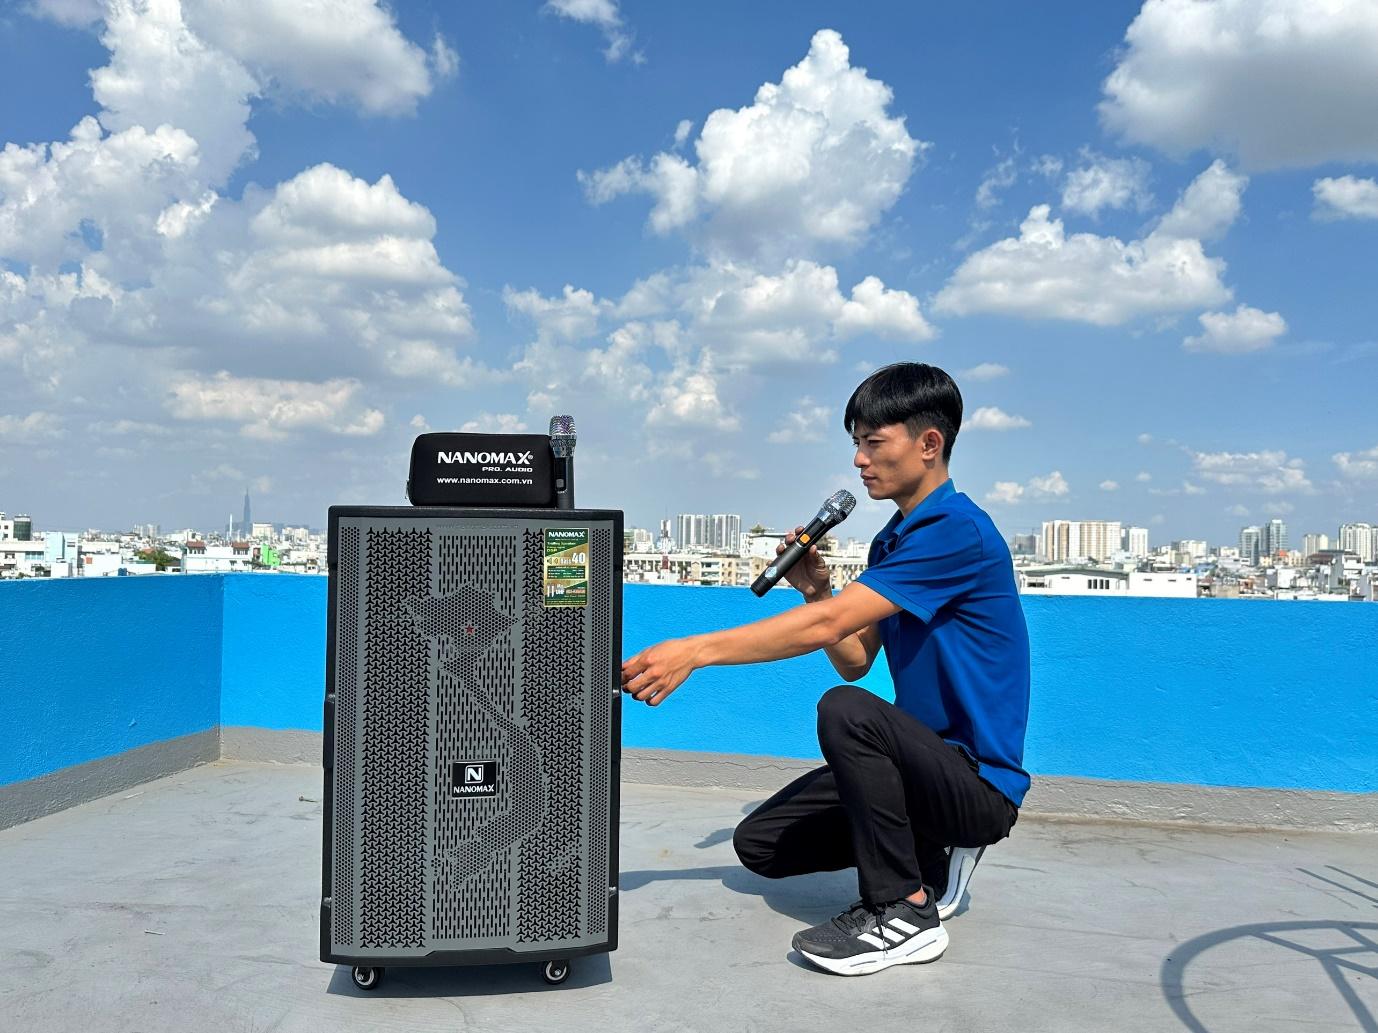 A person kneeling on a roof with a microphoneDescription automatically generated